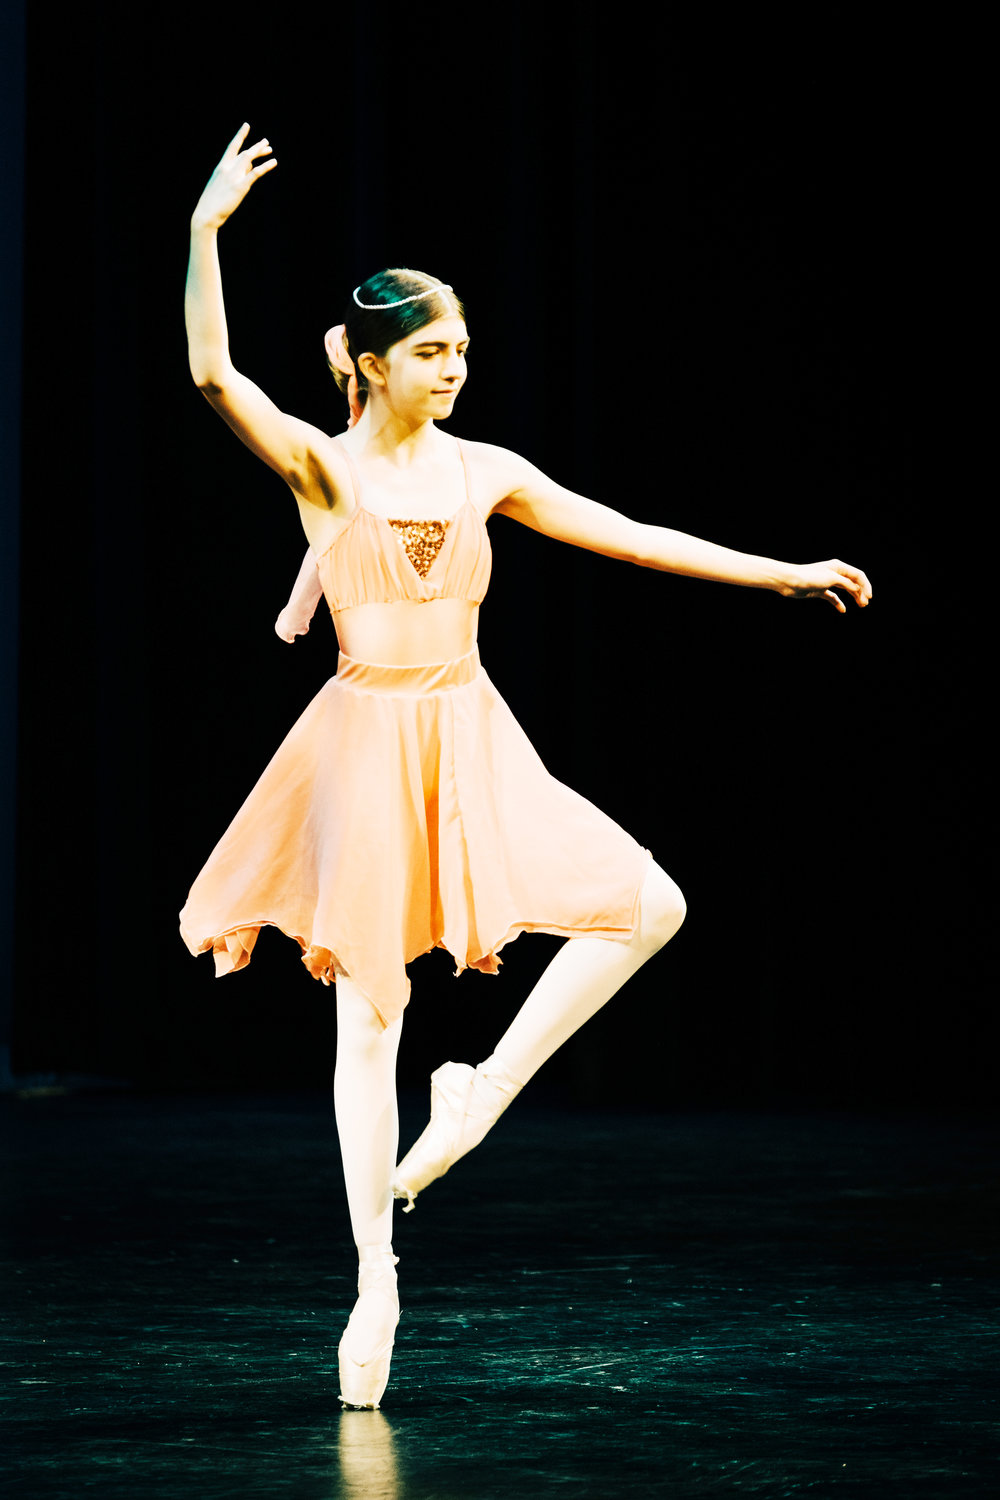 Pittsburg Ballet student Ruby Kettler performs “Talisman Variation” as choreographed by Marius Petipa as part of Pittsburg Ballet’s Spring Showcase on Thursday, May 19.